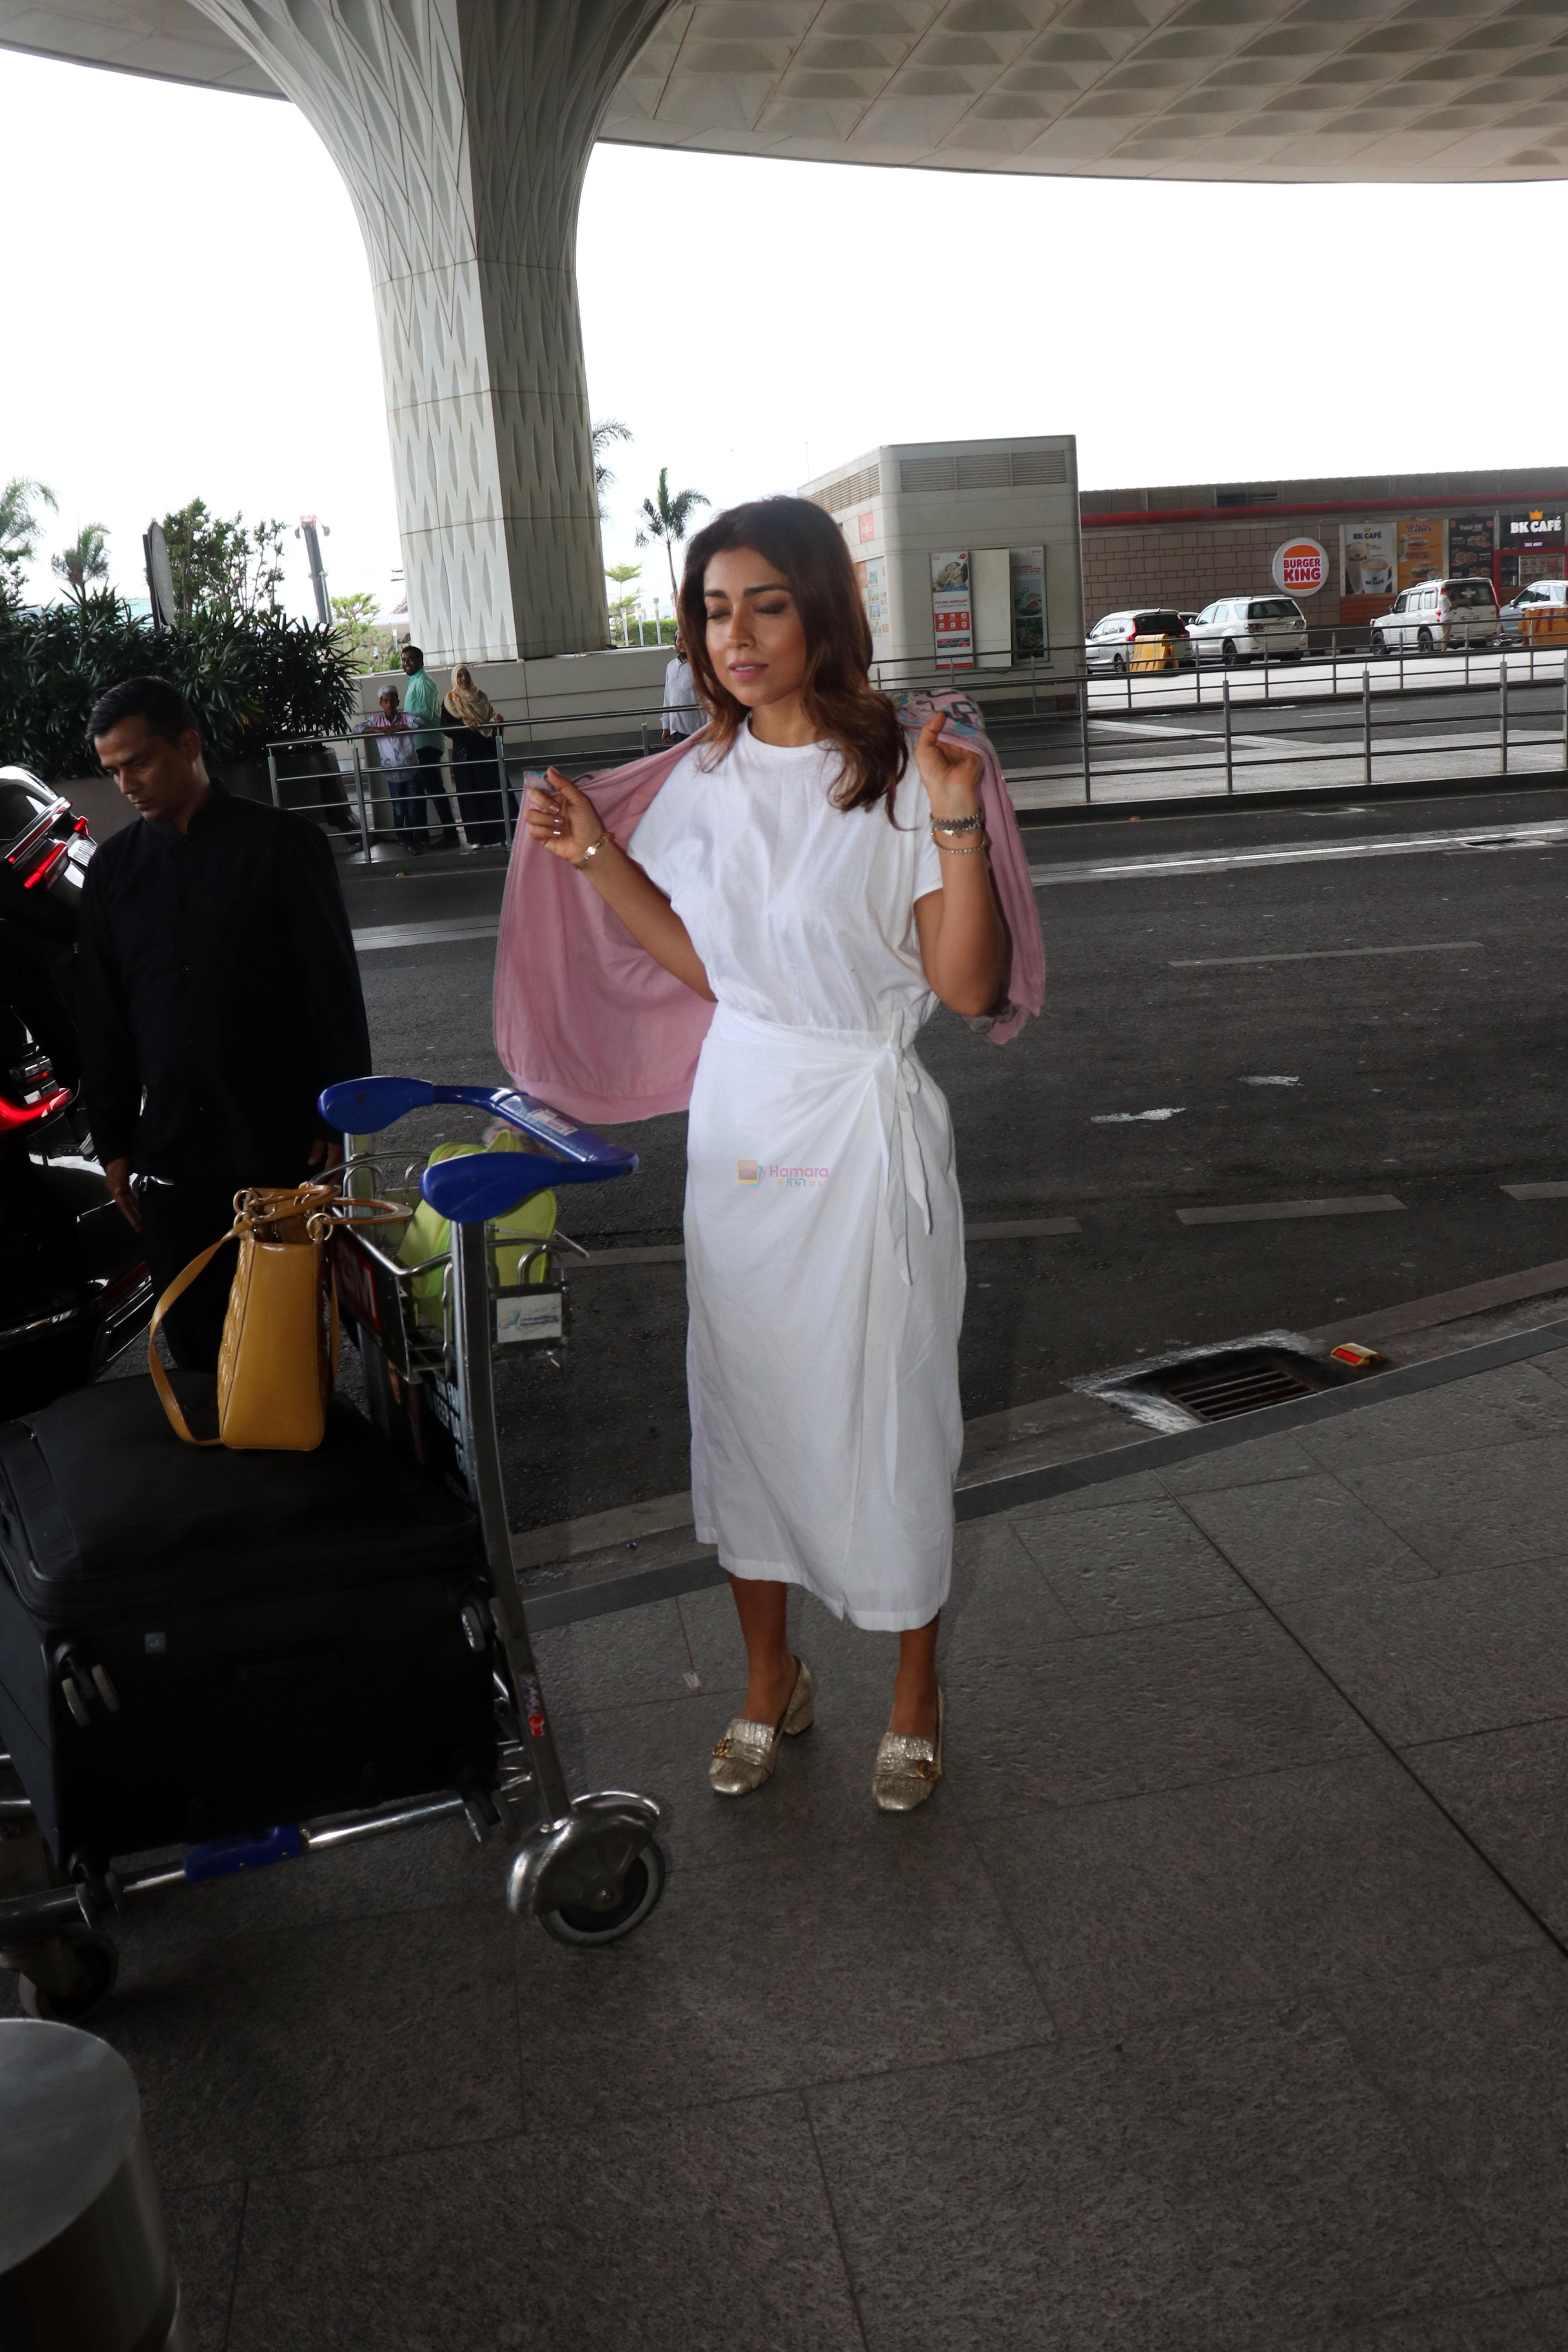 Shriya Saran in a white dress, pink coat design, holding Lady Dior Cannage two-way bag, Gucci Metallic Gold Textured Leather GG Marmont Fringe Detail Heel Pumps